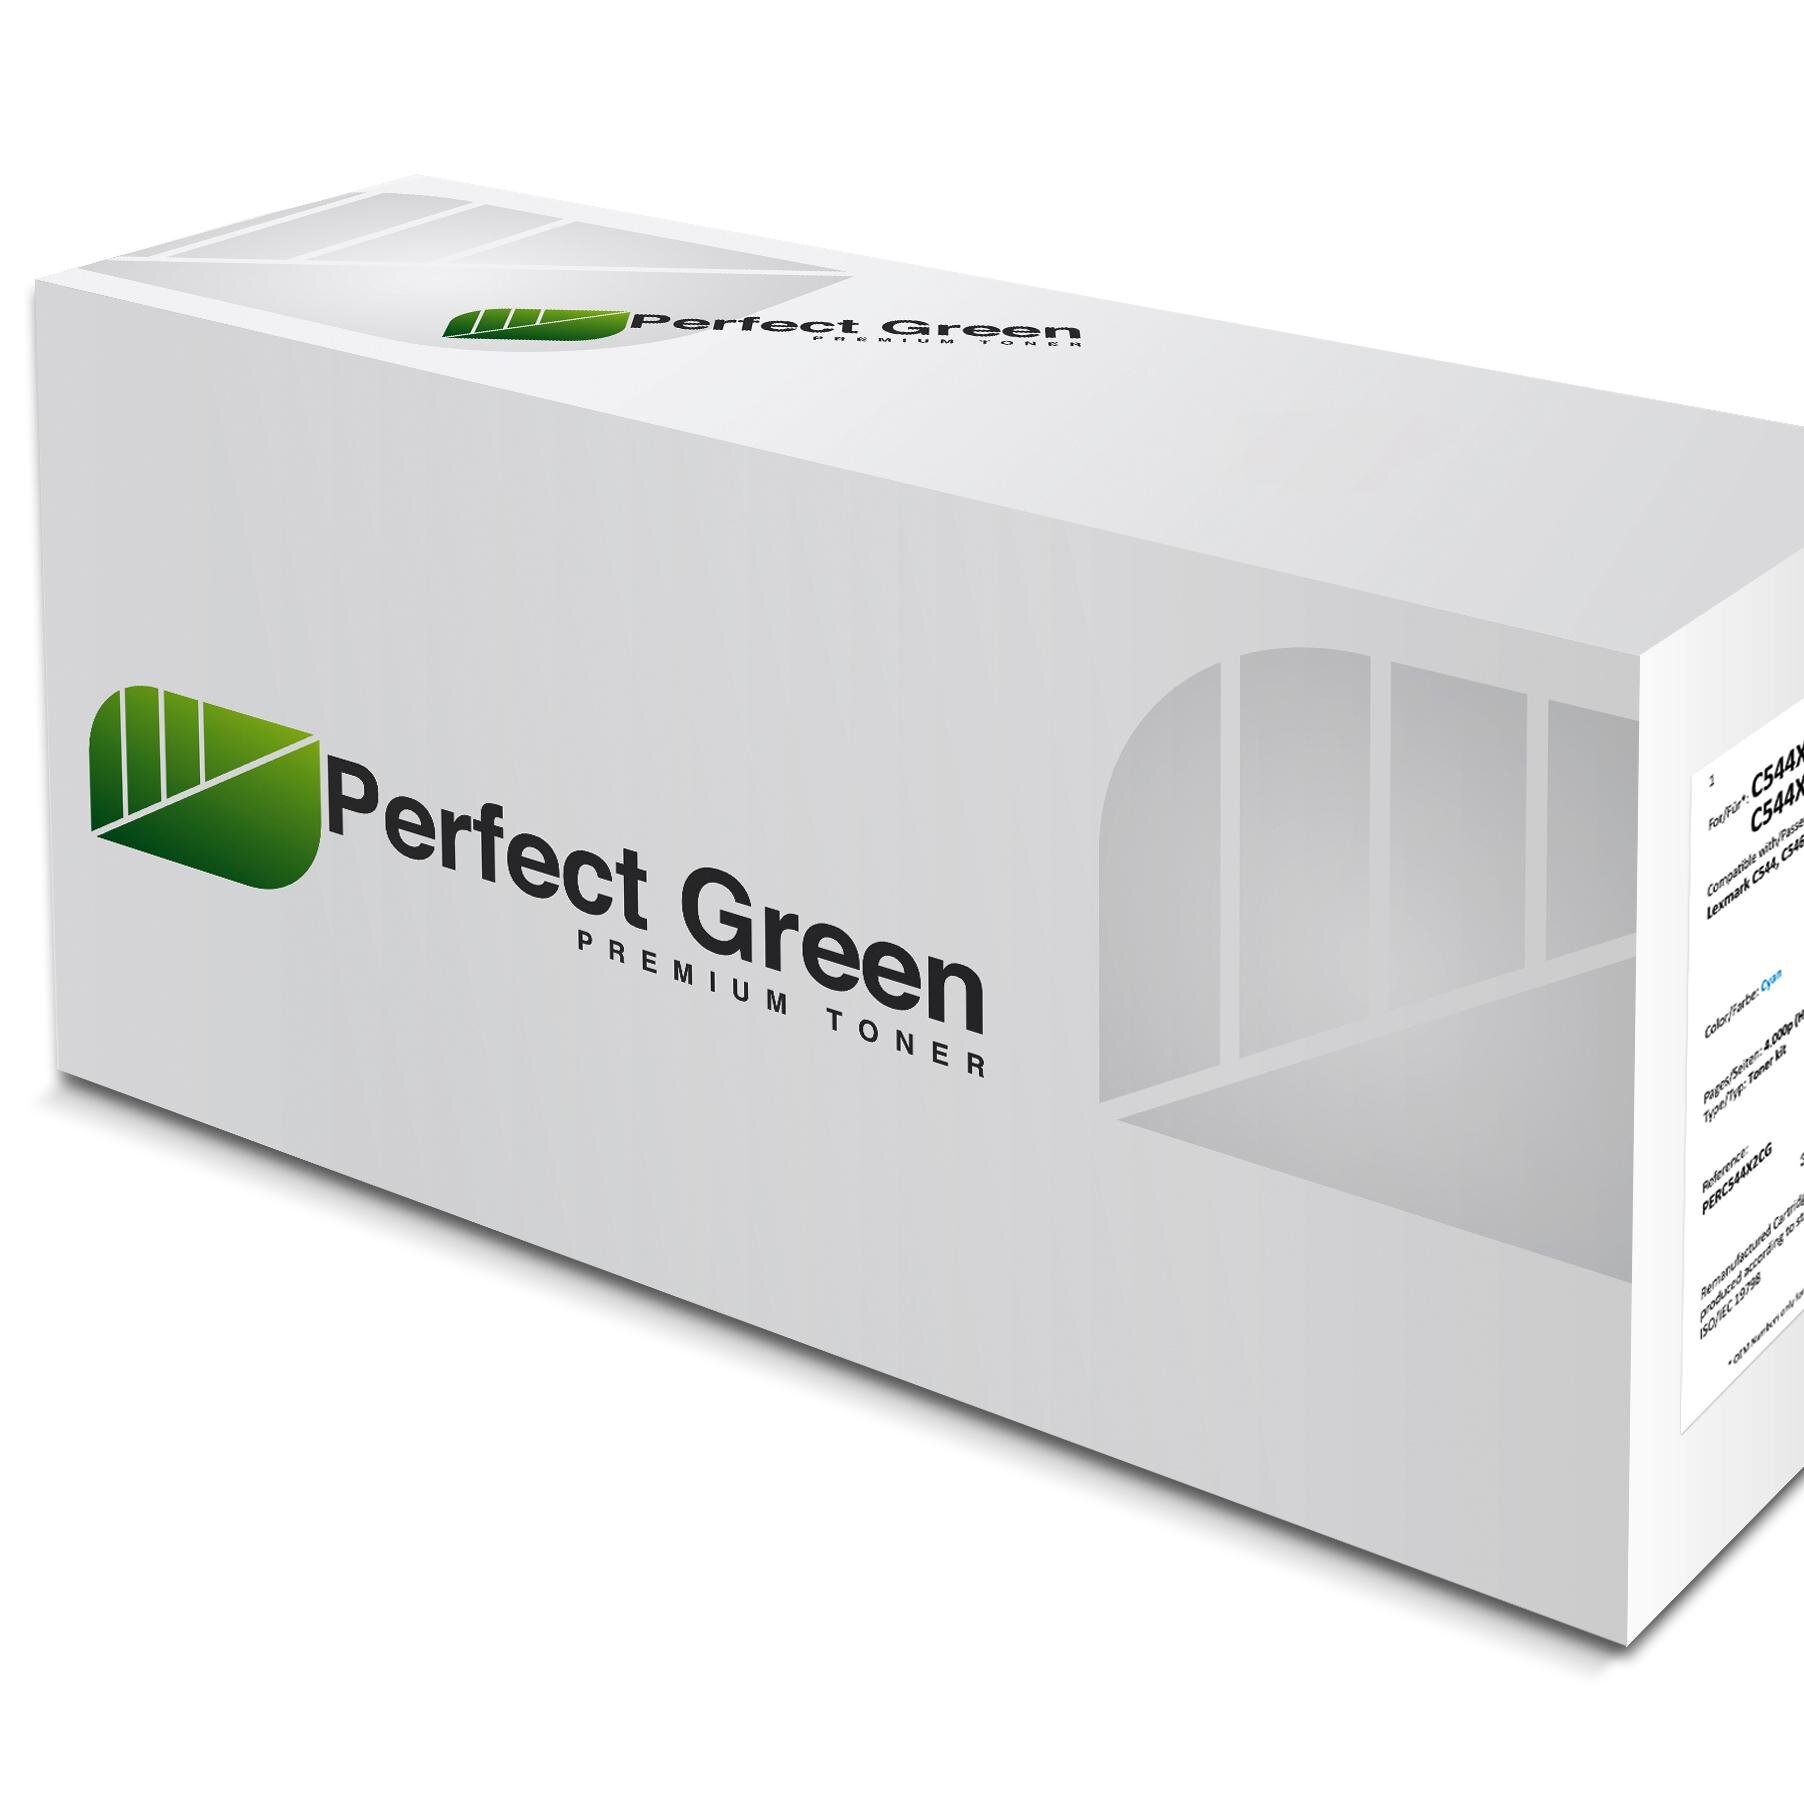 Perfect Green environmentally friendly remanufactured laser toner cartridges come with a three year warranty and a quality guarantee.